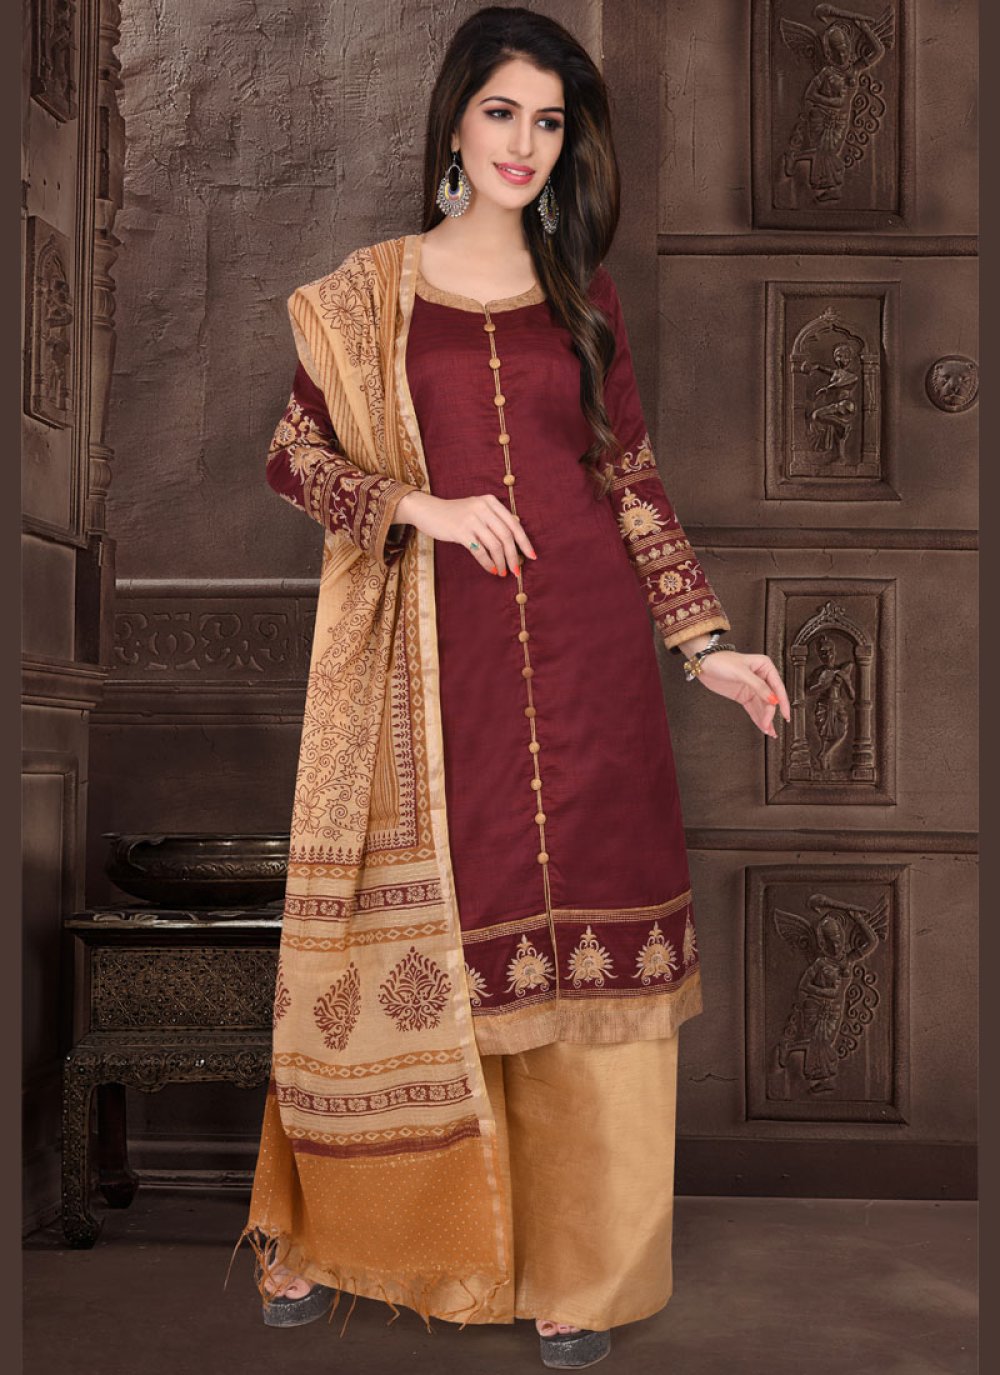 Embroidery Bhagalpuri Silk Salwar Suit with Dupatta @ 79% OFF Rs 399.00  Only FREE Shipping + Extra Discount - Designer Salwar Suit, Buy Designer  Salwar Suit Online, Online Shopping, Embroidery Suit, Buy Embroidery Suit,  - iStYle99.com